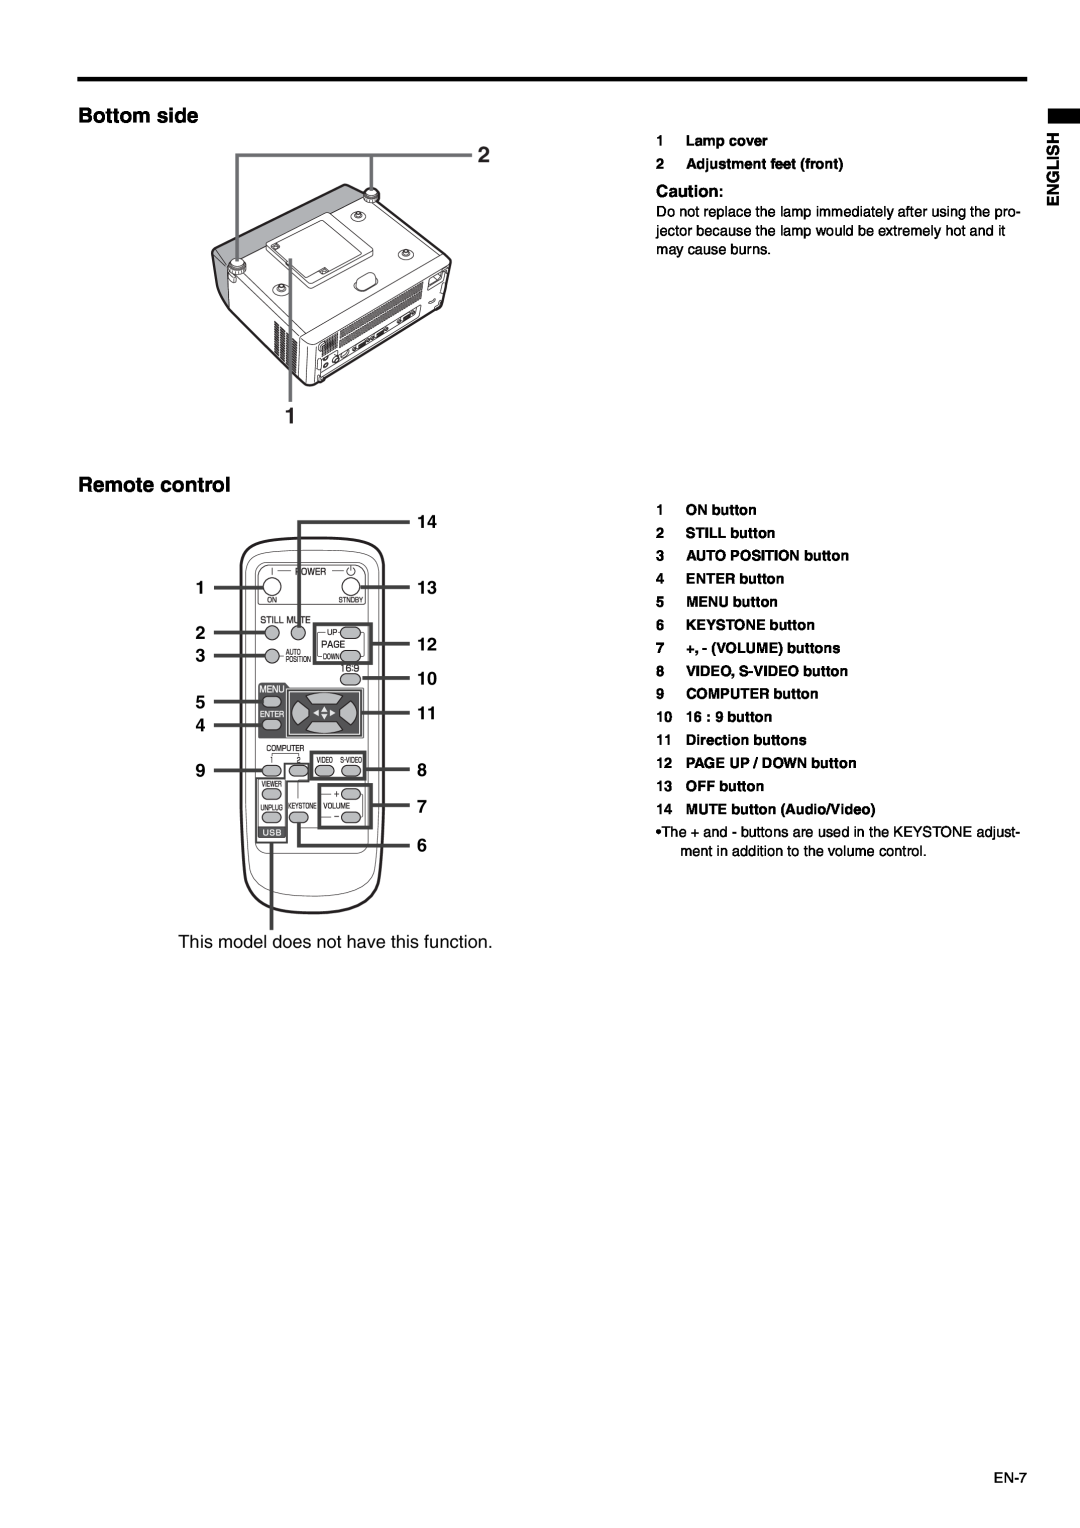 Mitsubishi Electronics SD105U user manual Bottom side Remote control, This model does not have this function, English 